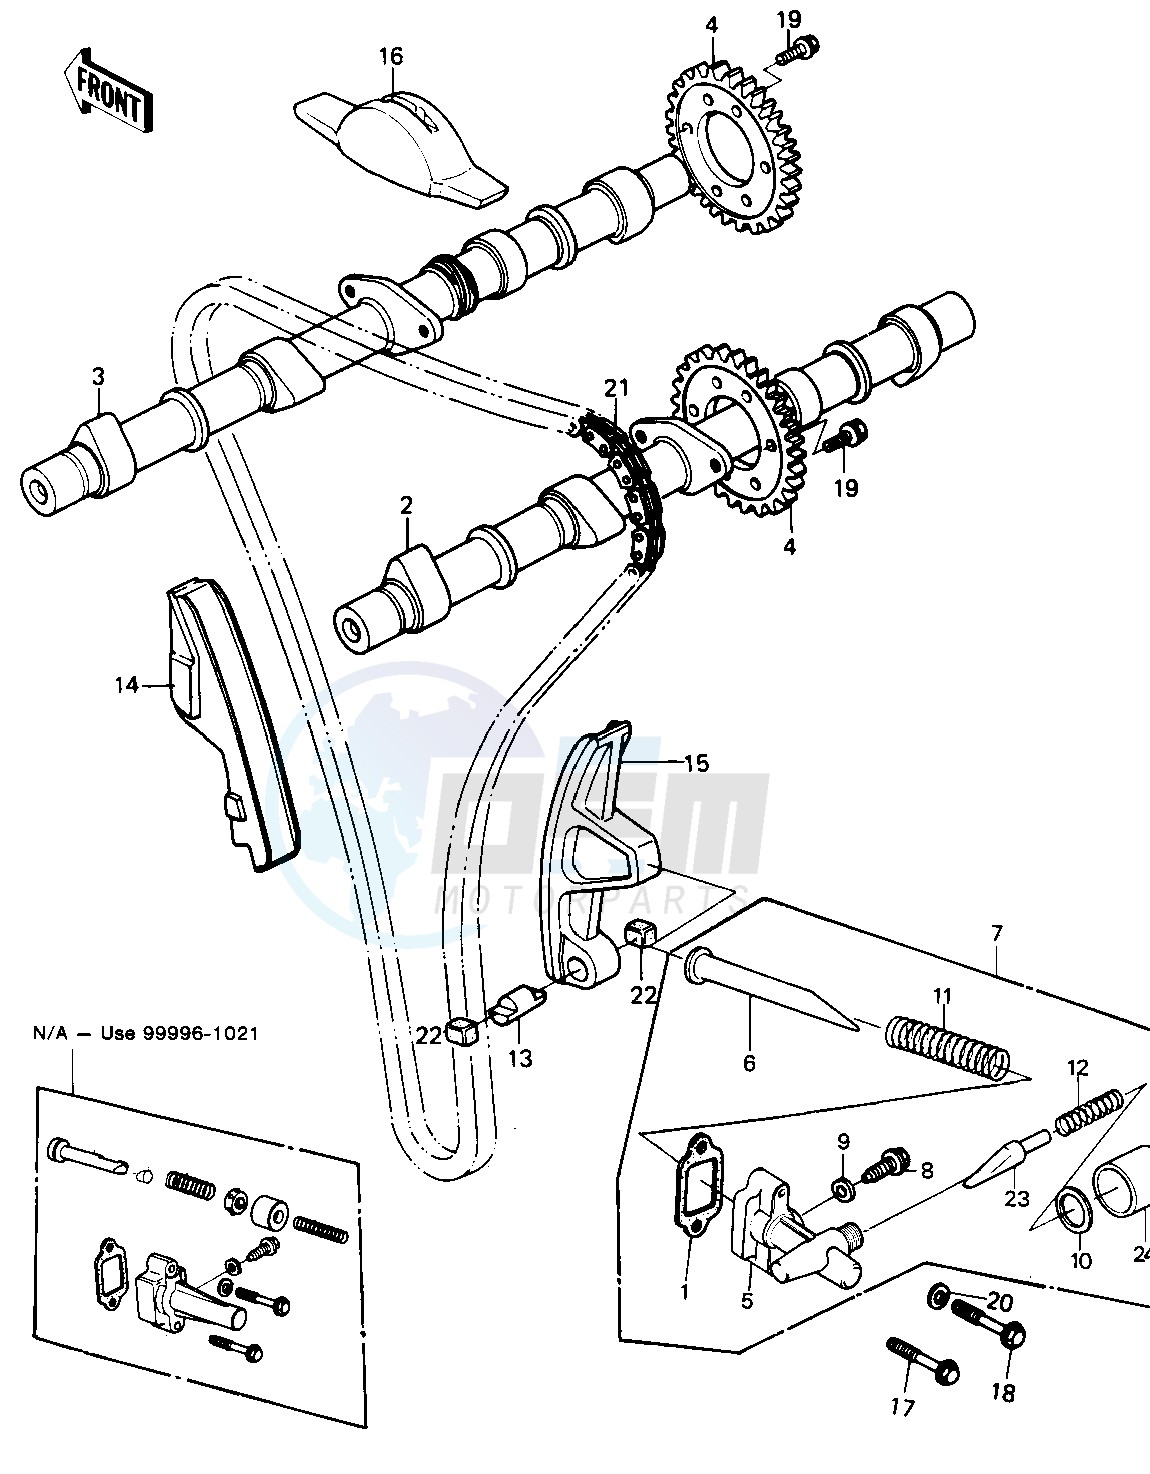 CAMSHAFTS_CHAIN_TENSIONER -- 80 KZY 50-E1- - image